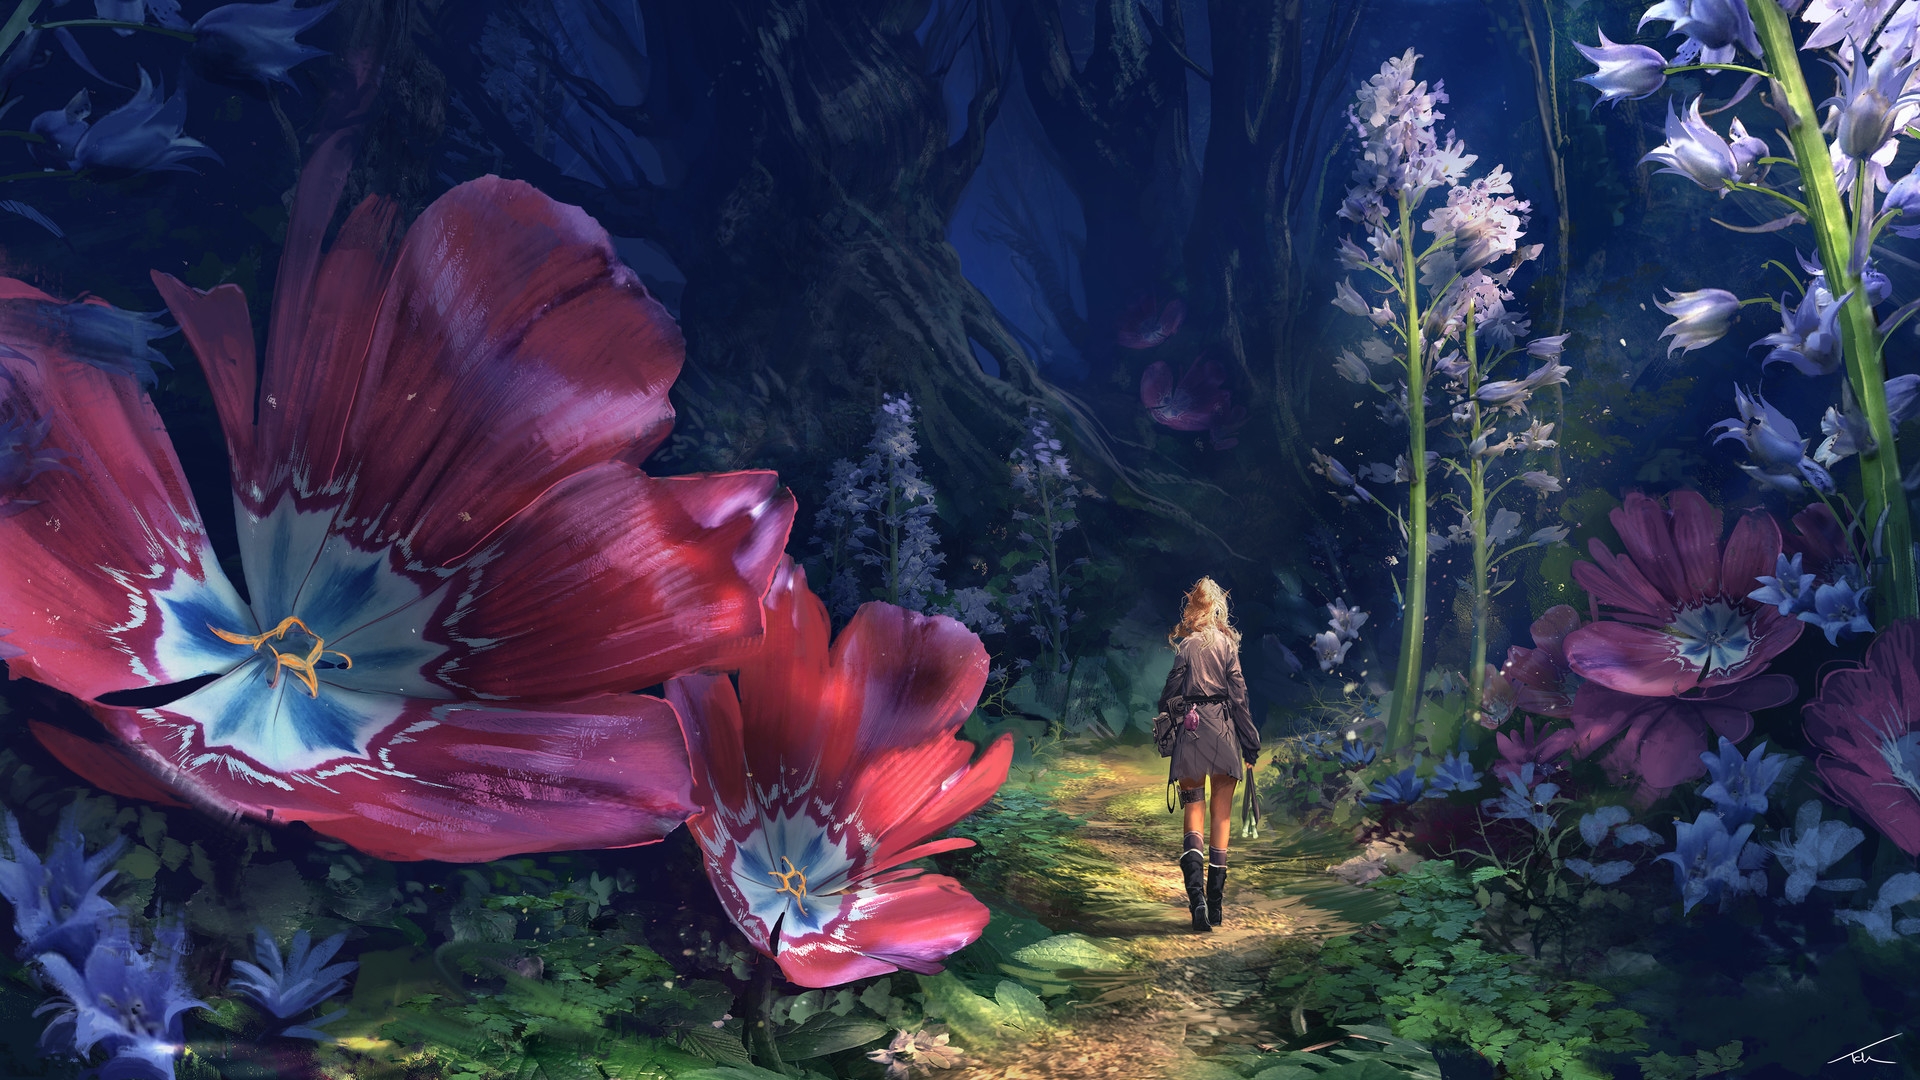 Enchanted Forest with Giant Flowers by Thomas Chamberlain